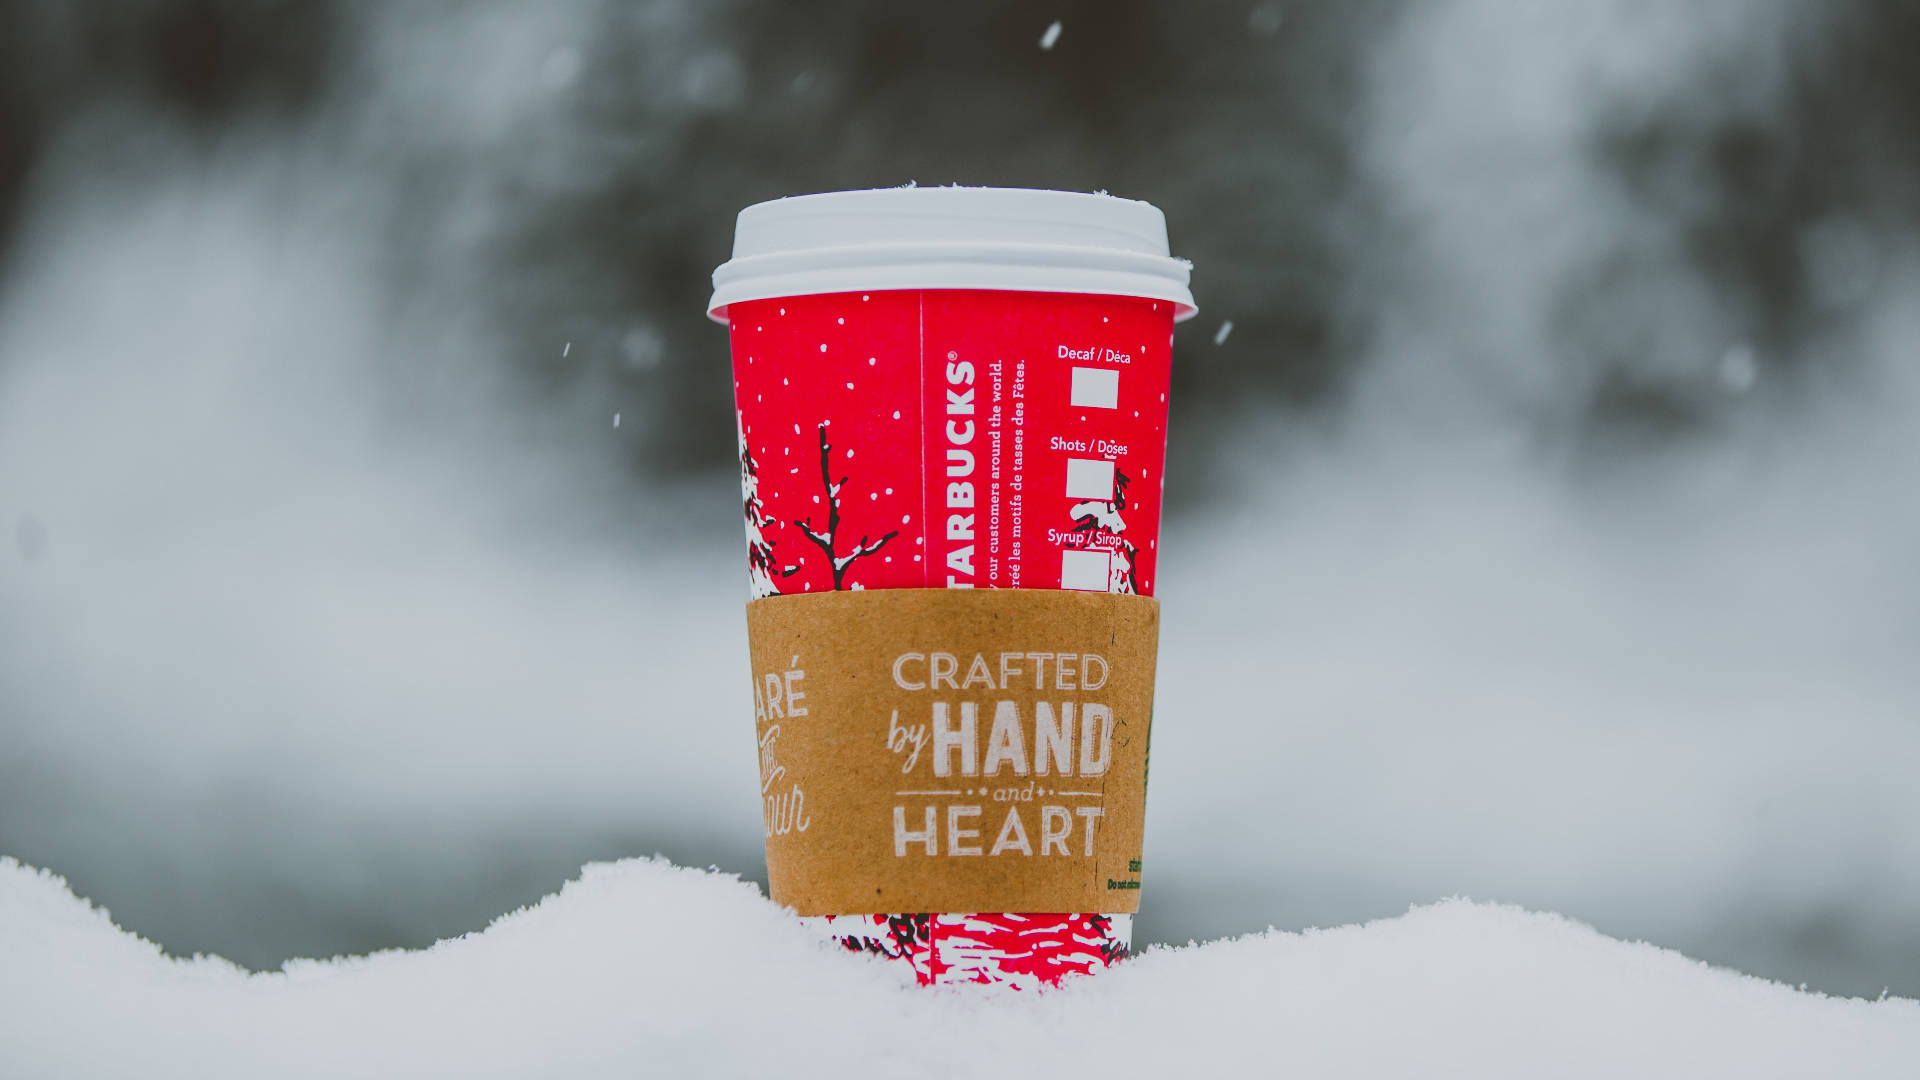 Starbucks Cup On Snow Background